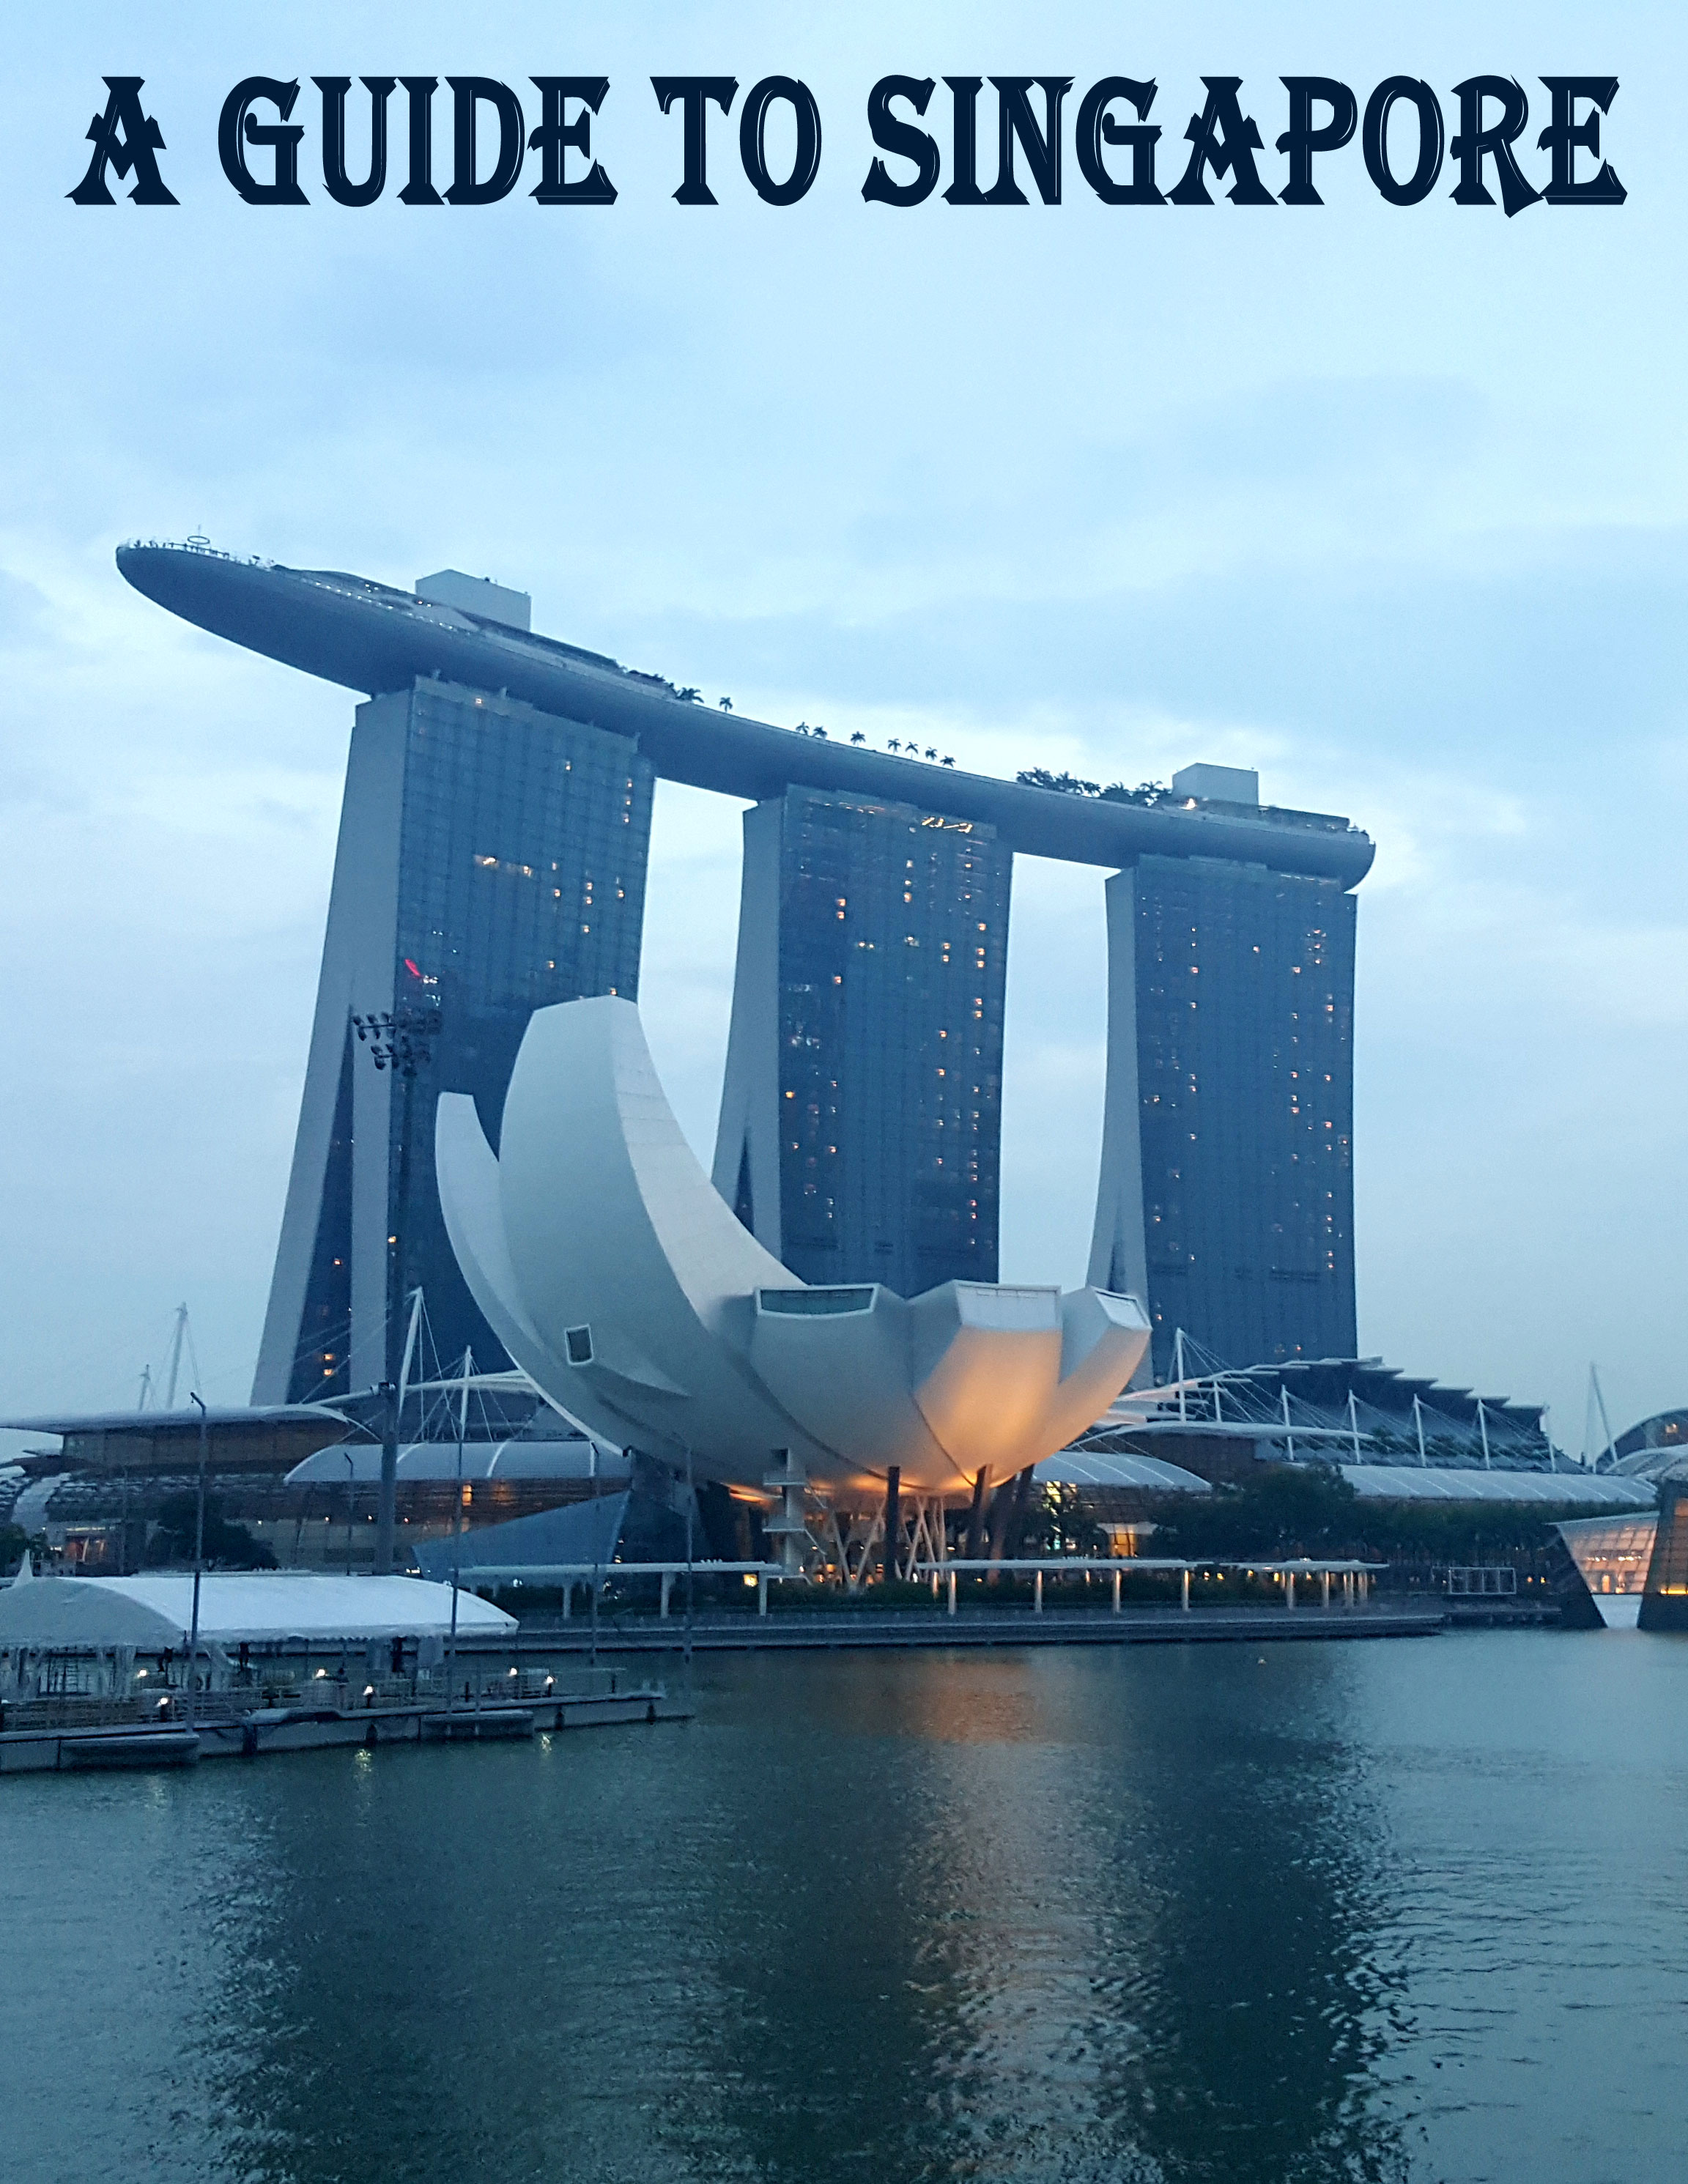 Your complete insider's guide to Singapore - includes the top attractions in Singapore, where to eat in Singapore, and Singapore tips. #Singapore #singaporeguide #singaporetraveling #singaporetravel #asiatravel #singaporetravelguide #travelguide